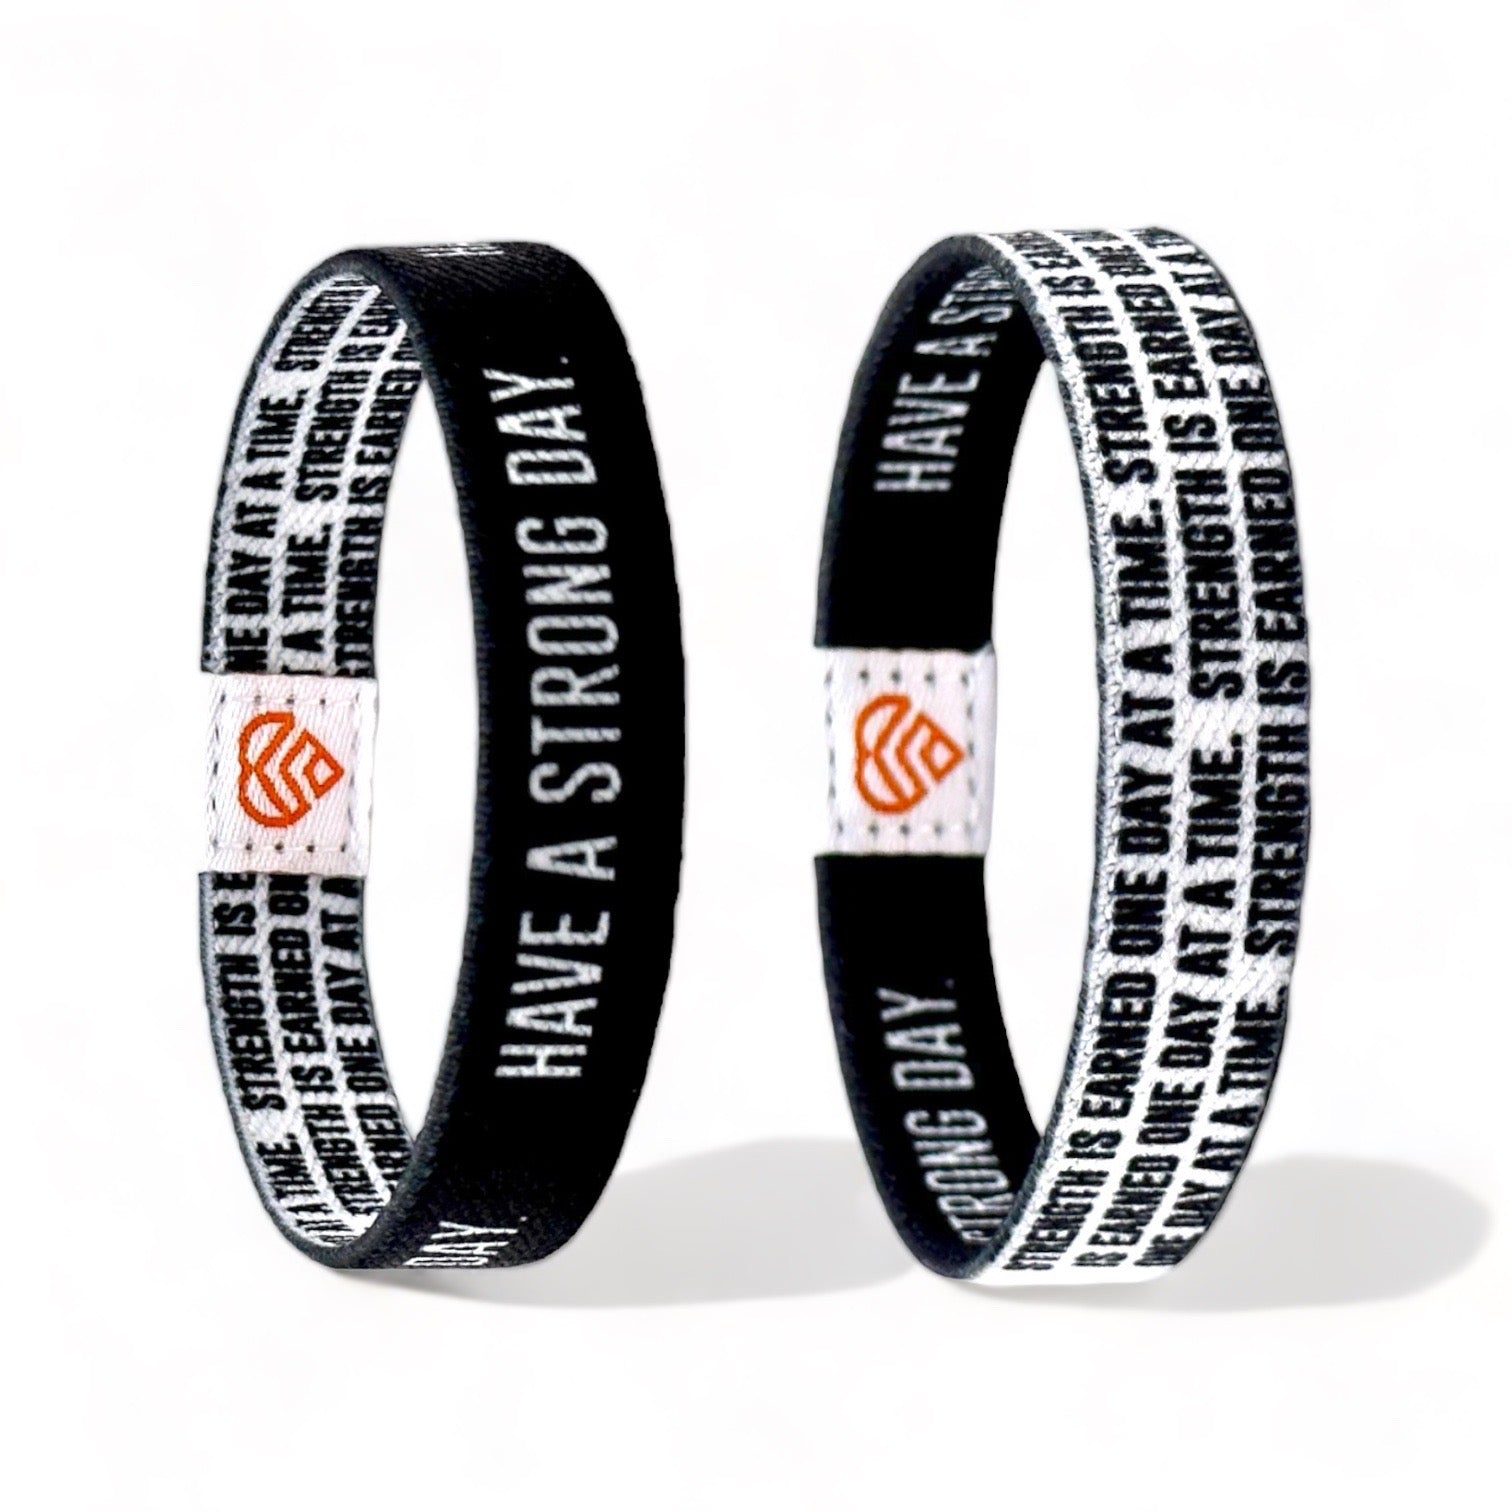 "Strength is earned one day at a time." | Adult Reversible Wristband